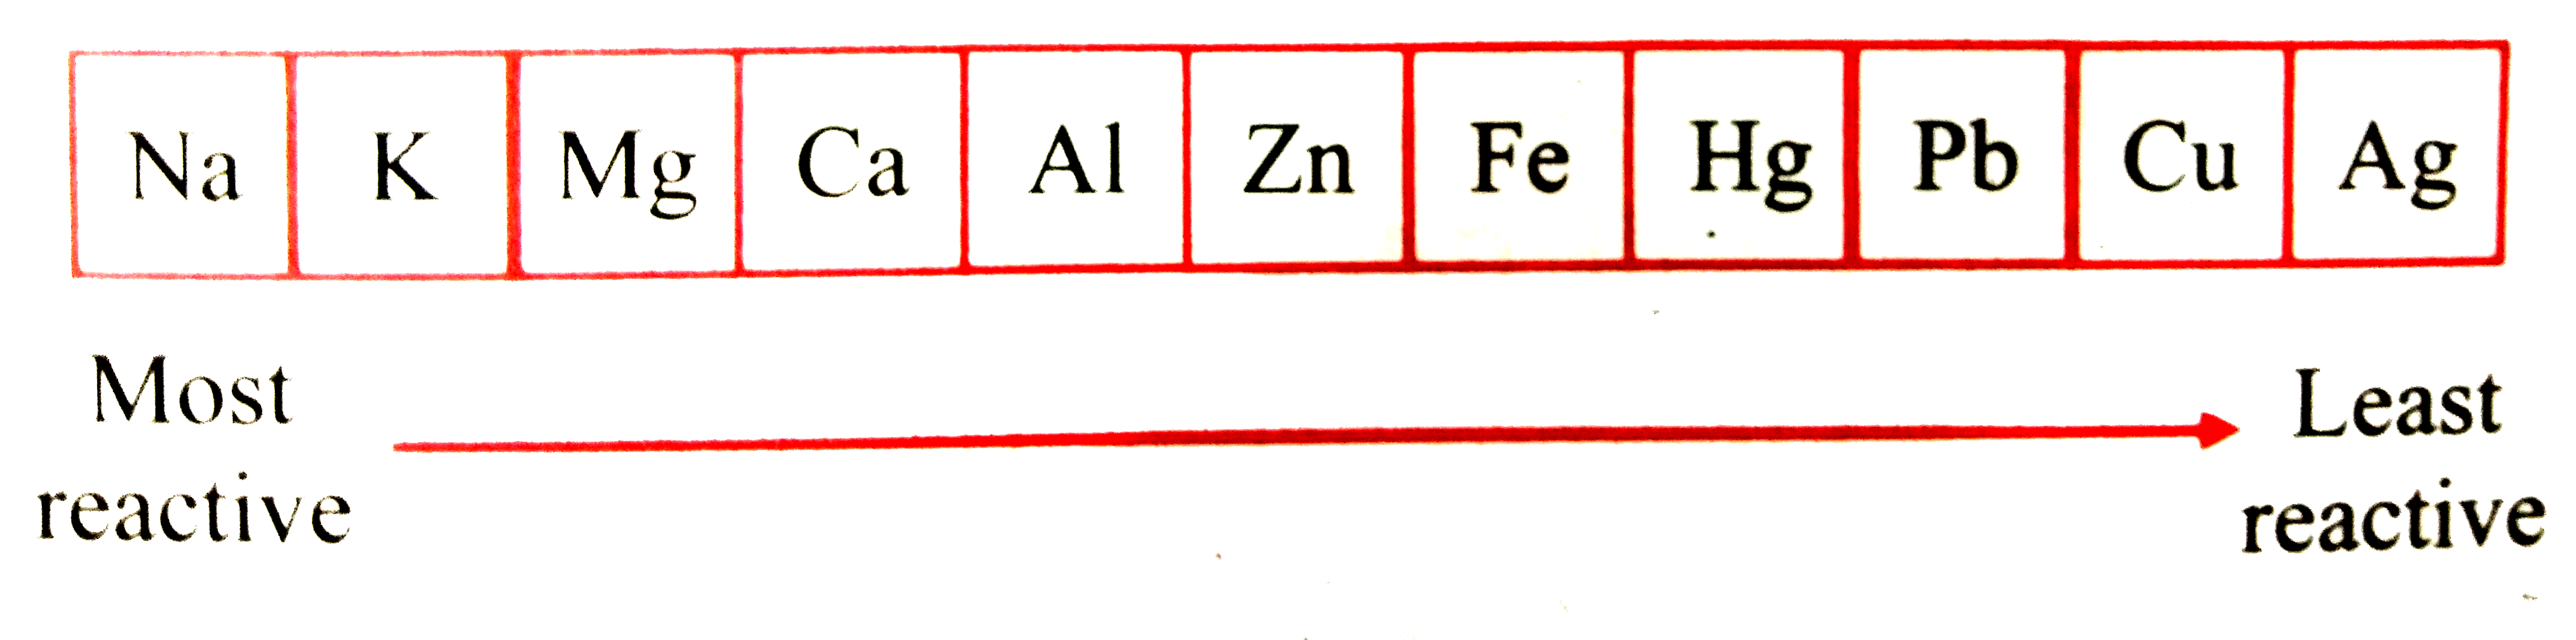 In the given reactivity series, some metals are misplaced. Rearrange these metals in the decreasing order of their reactivity.